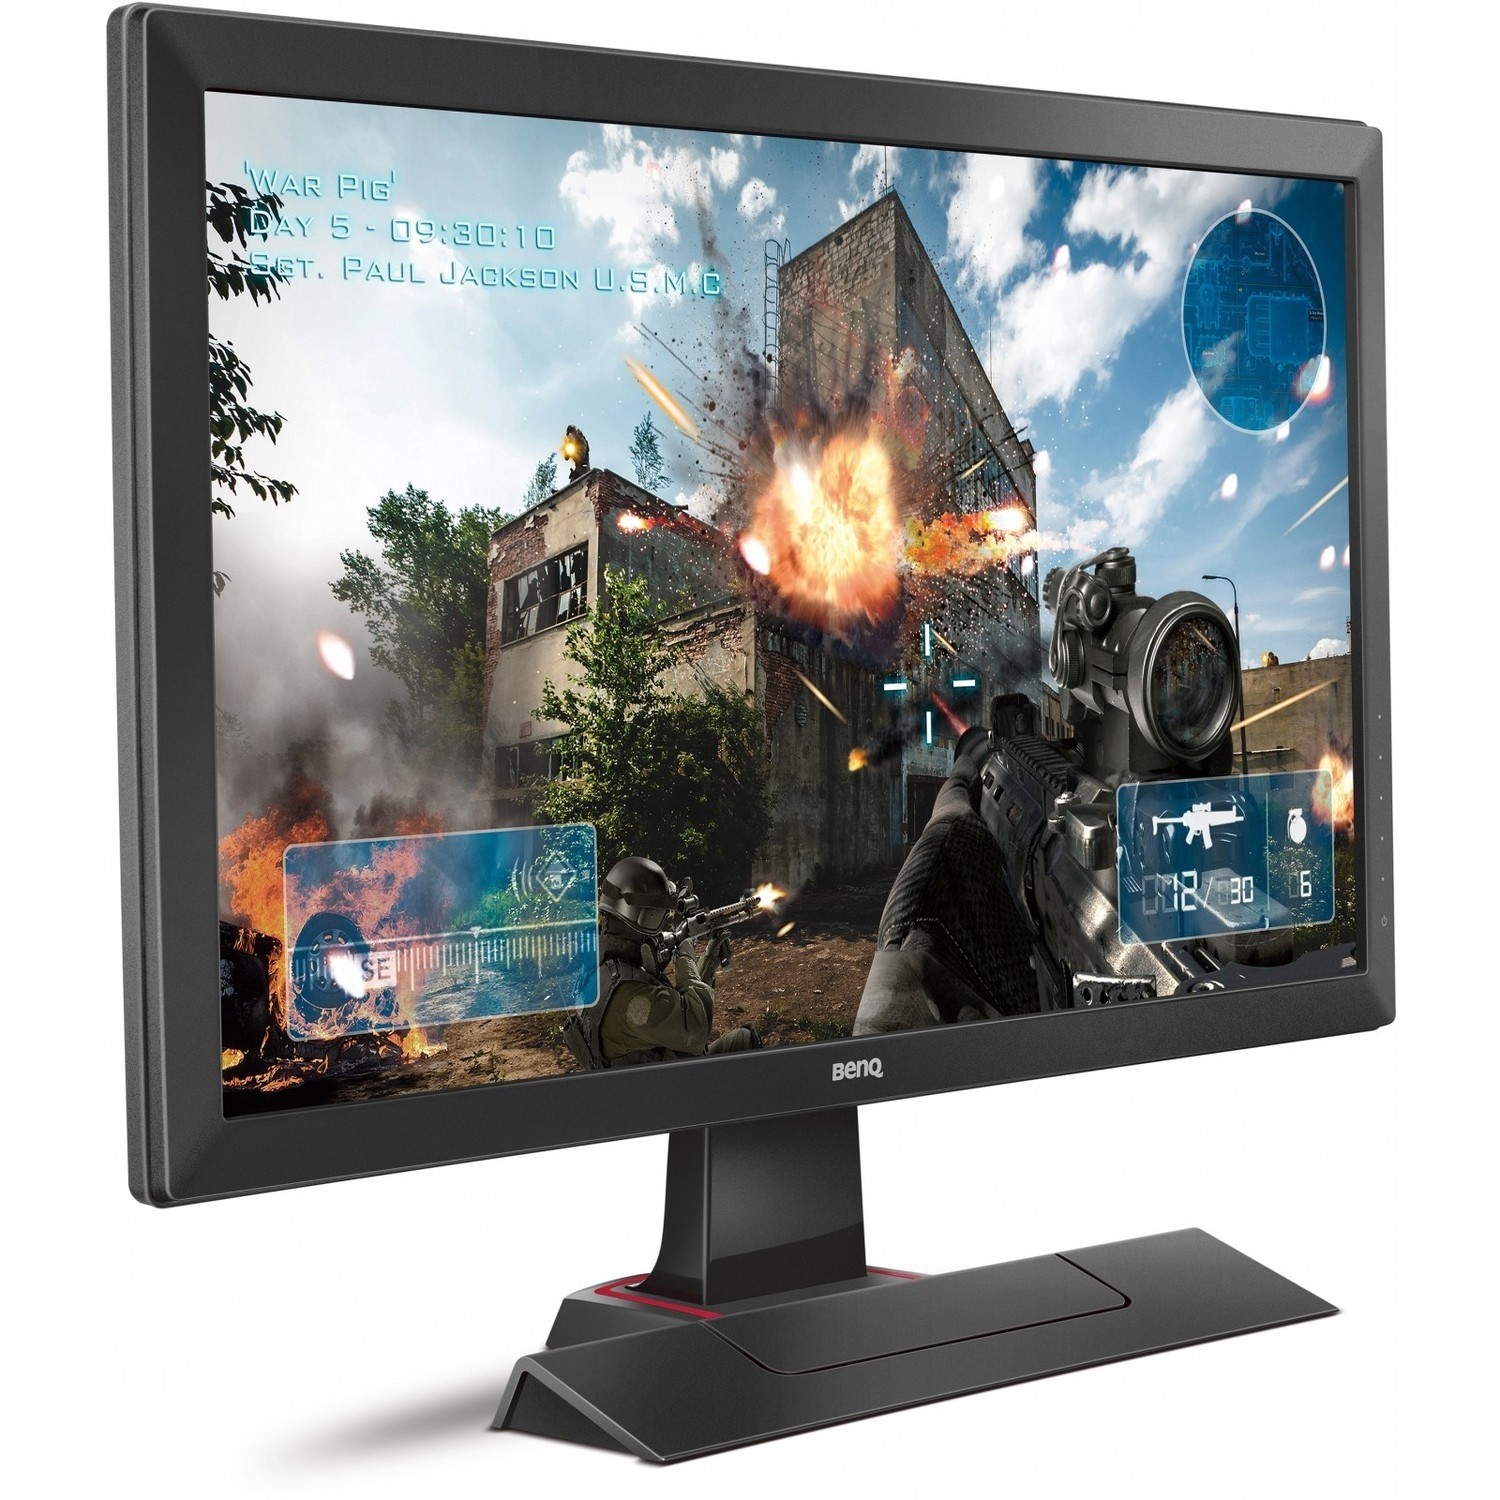 RL2455 BenQ ZOWIE 24 Console eSports Gaming LED 1080p HD Monitor 1ms Response Time for Ultra Fast Console Gaming 